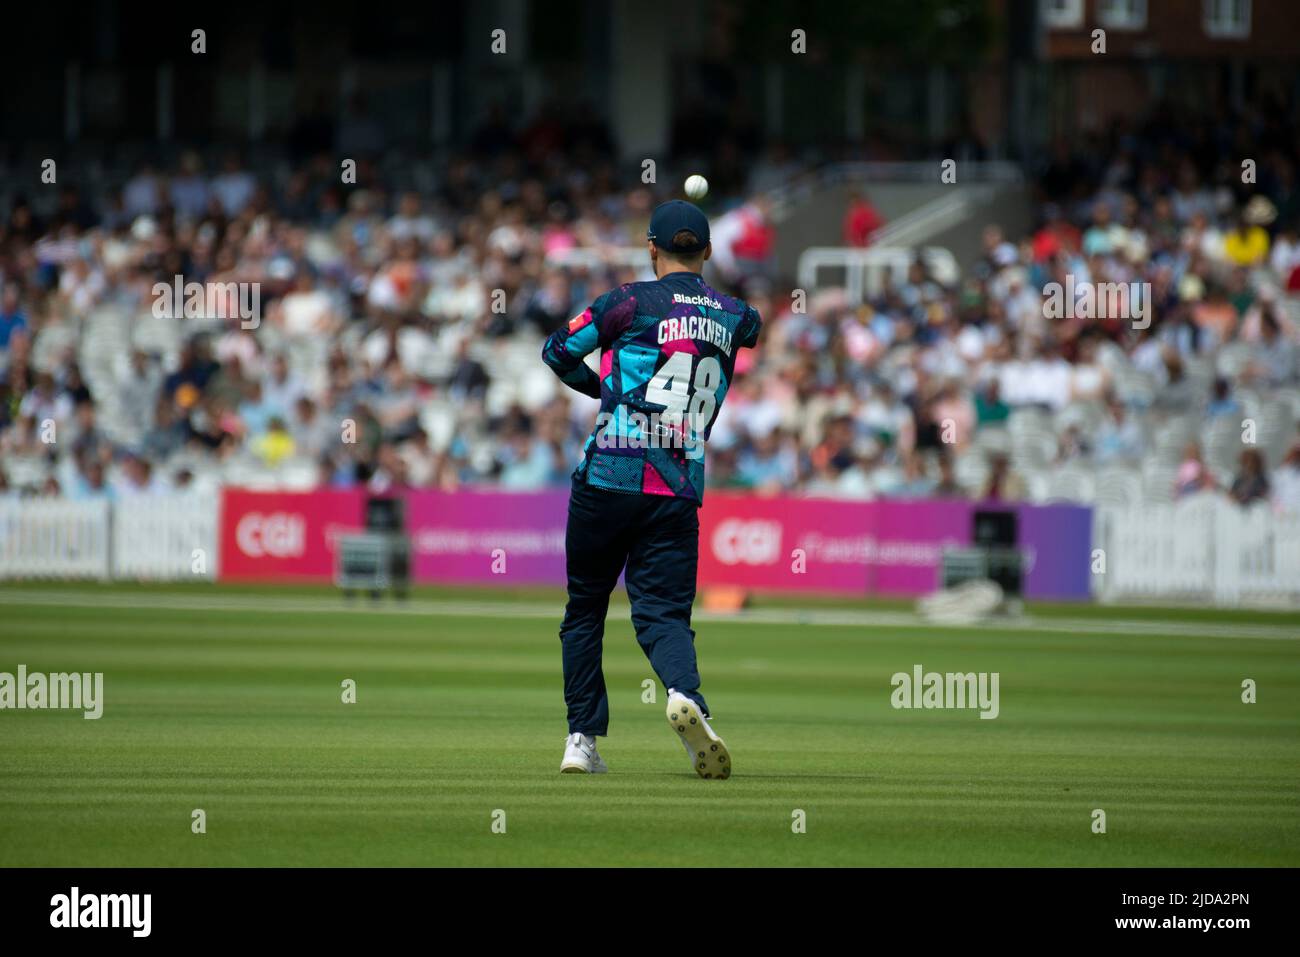 Joe Cracknell fields at lords in the Vitality T20 Blast on the 19th of June 2022 Stock Photo